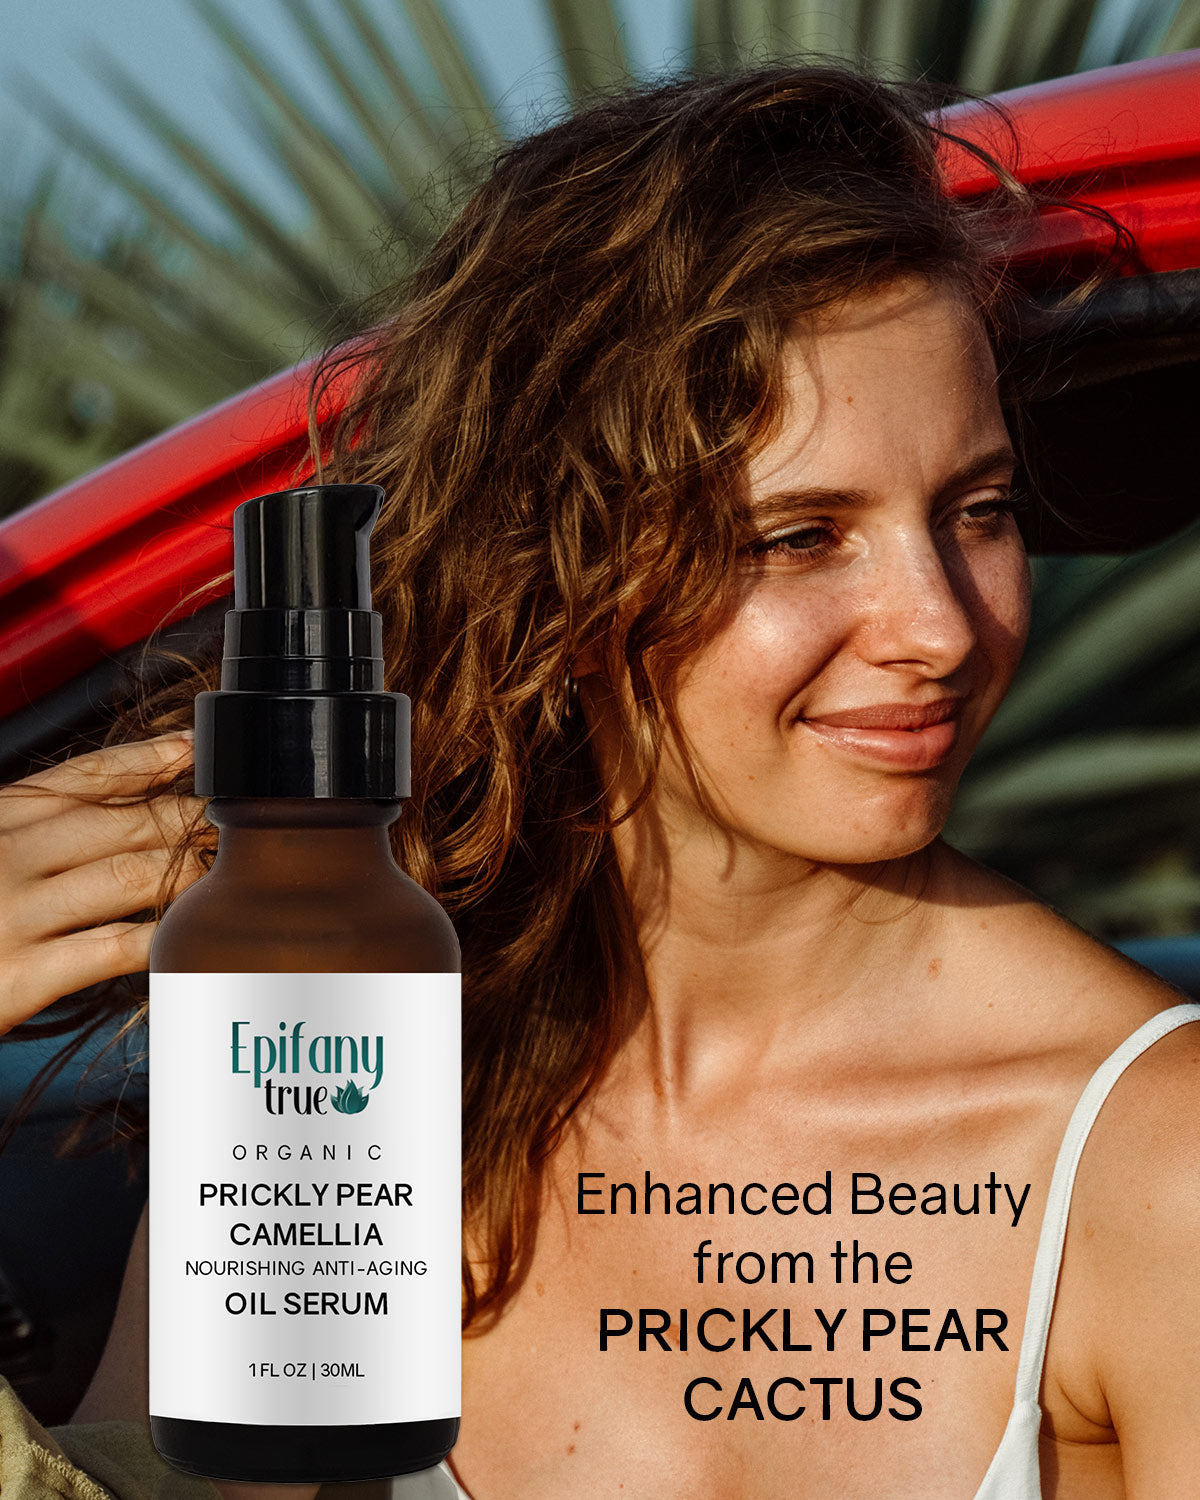 Organic Prickly Pear and Camellia Face Oil Serum 30ml | Epifany True